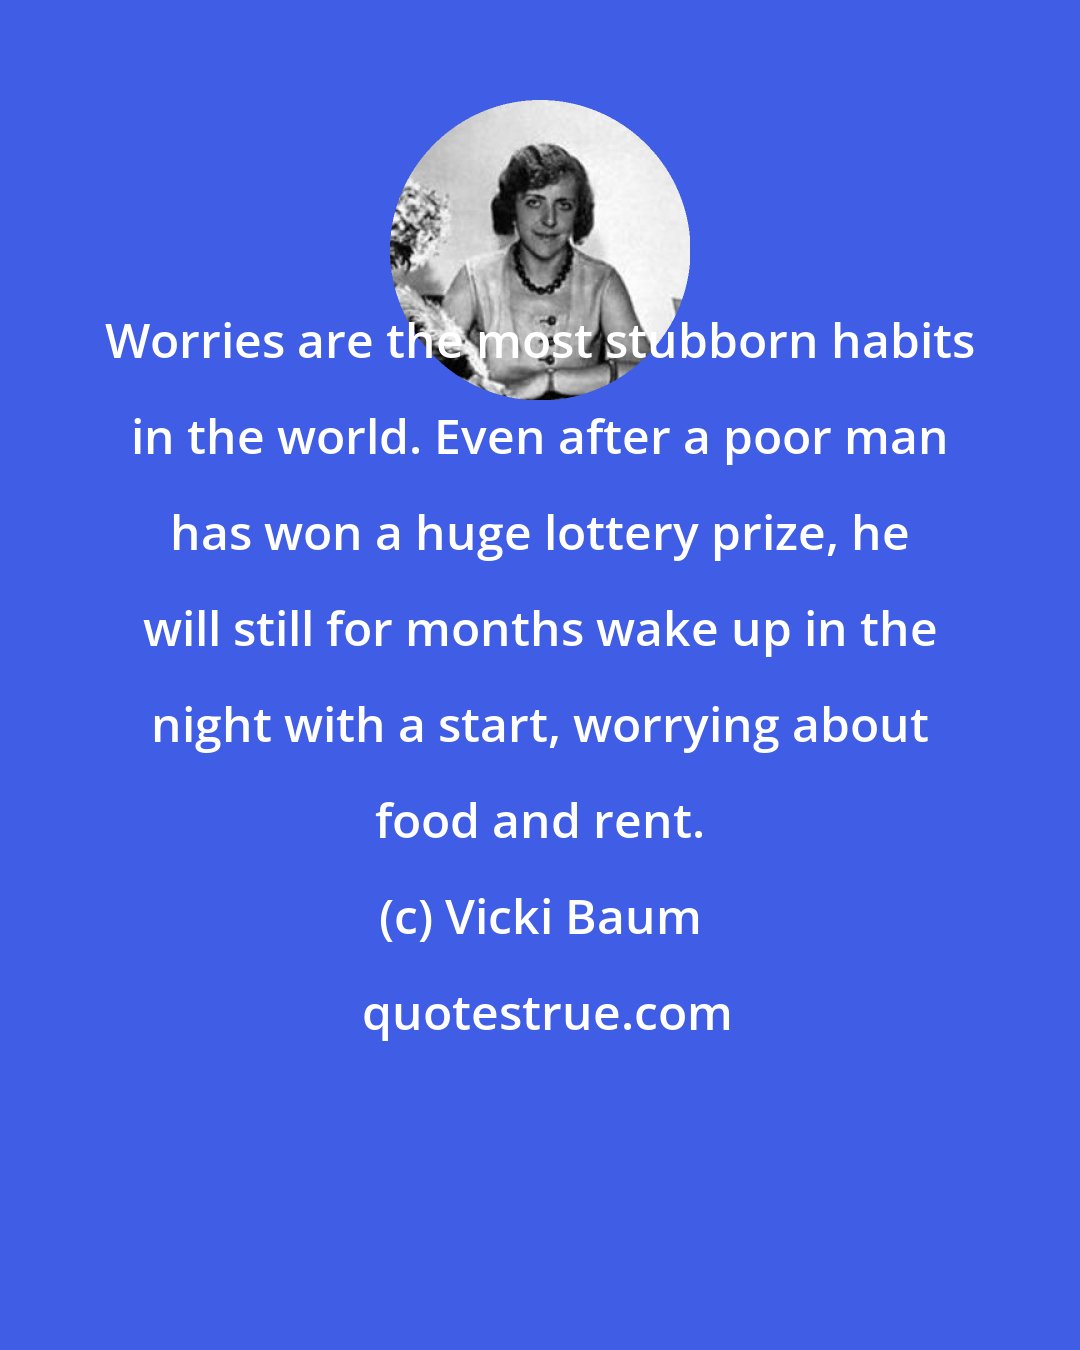 Vicki Baum: Worries are the most stubborn habits in the world. Even after a poor man has won a huge lottery prize, he will still for months wake up in the night with a start, worrying about food and rent.